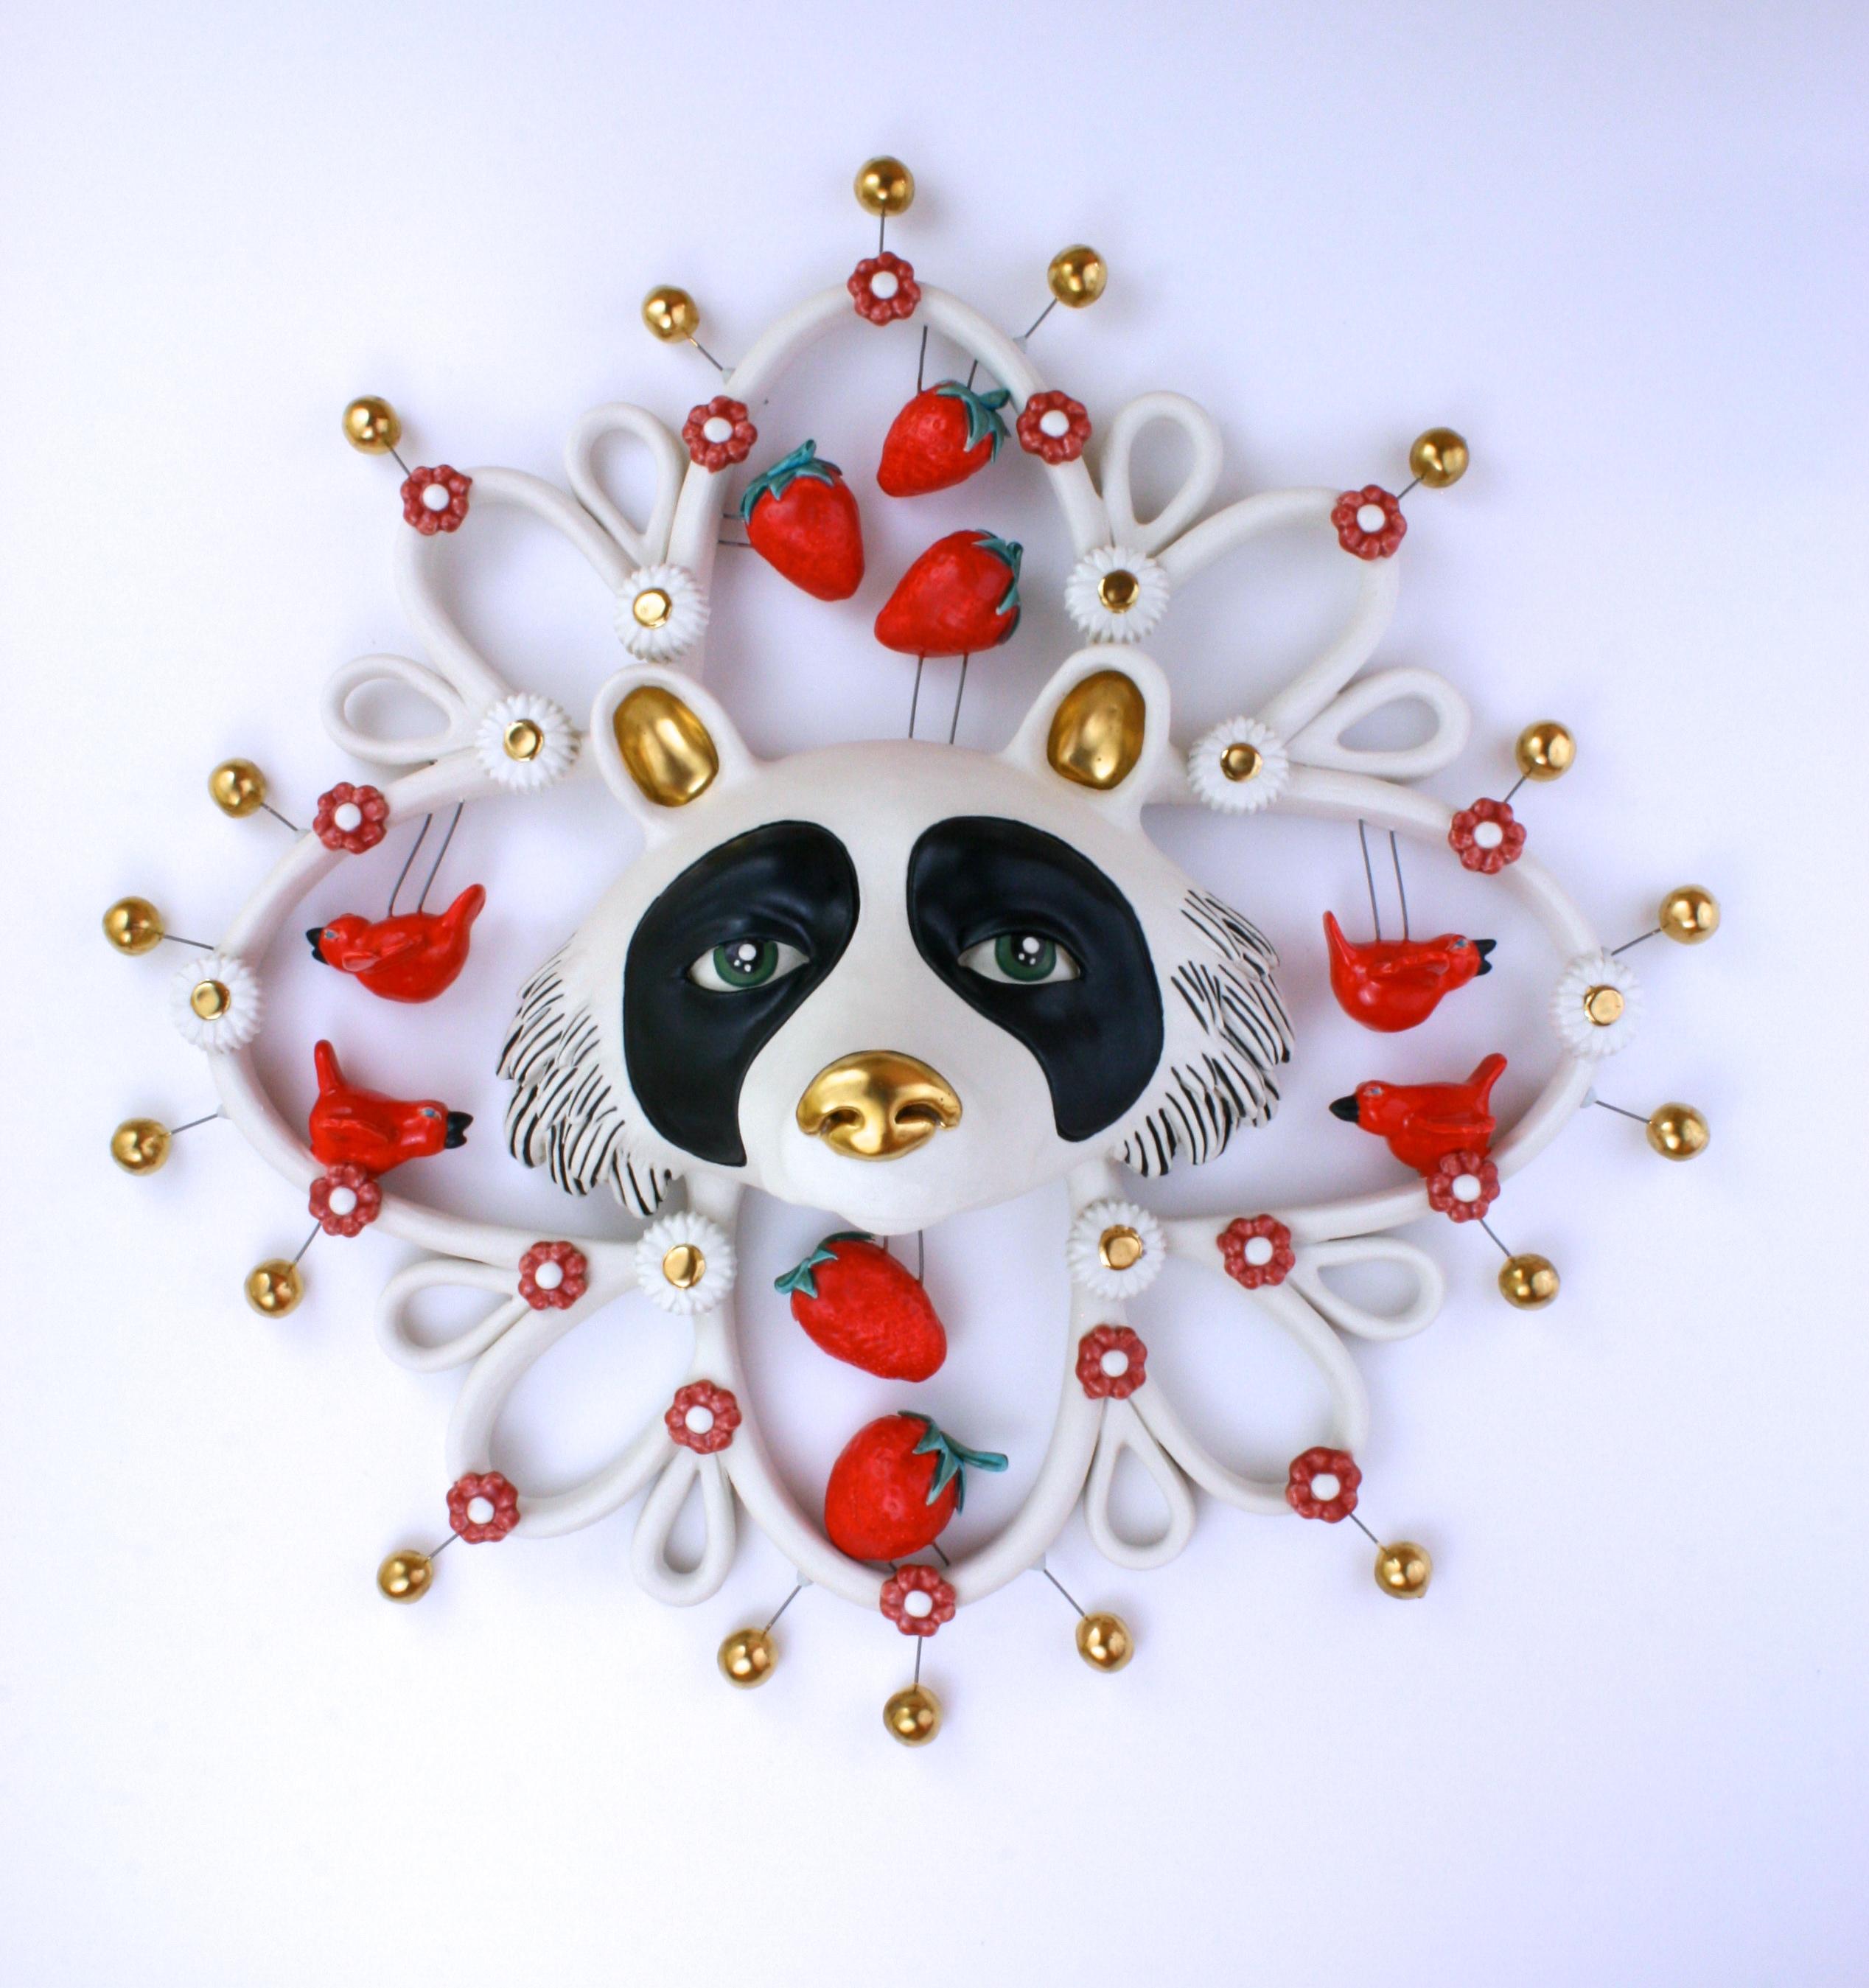 RED RACCOON - porcelain ceramic sculpture of raccoon, strawberries and cardinals